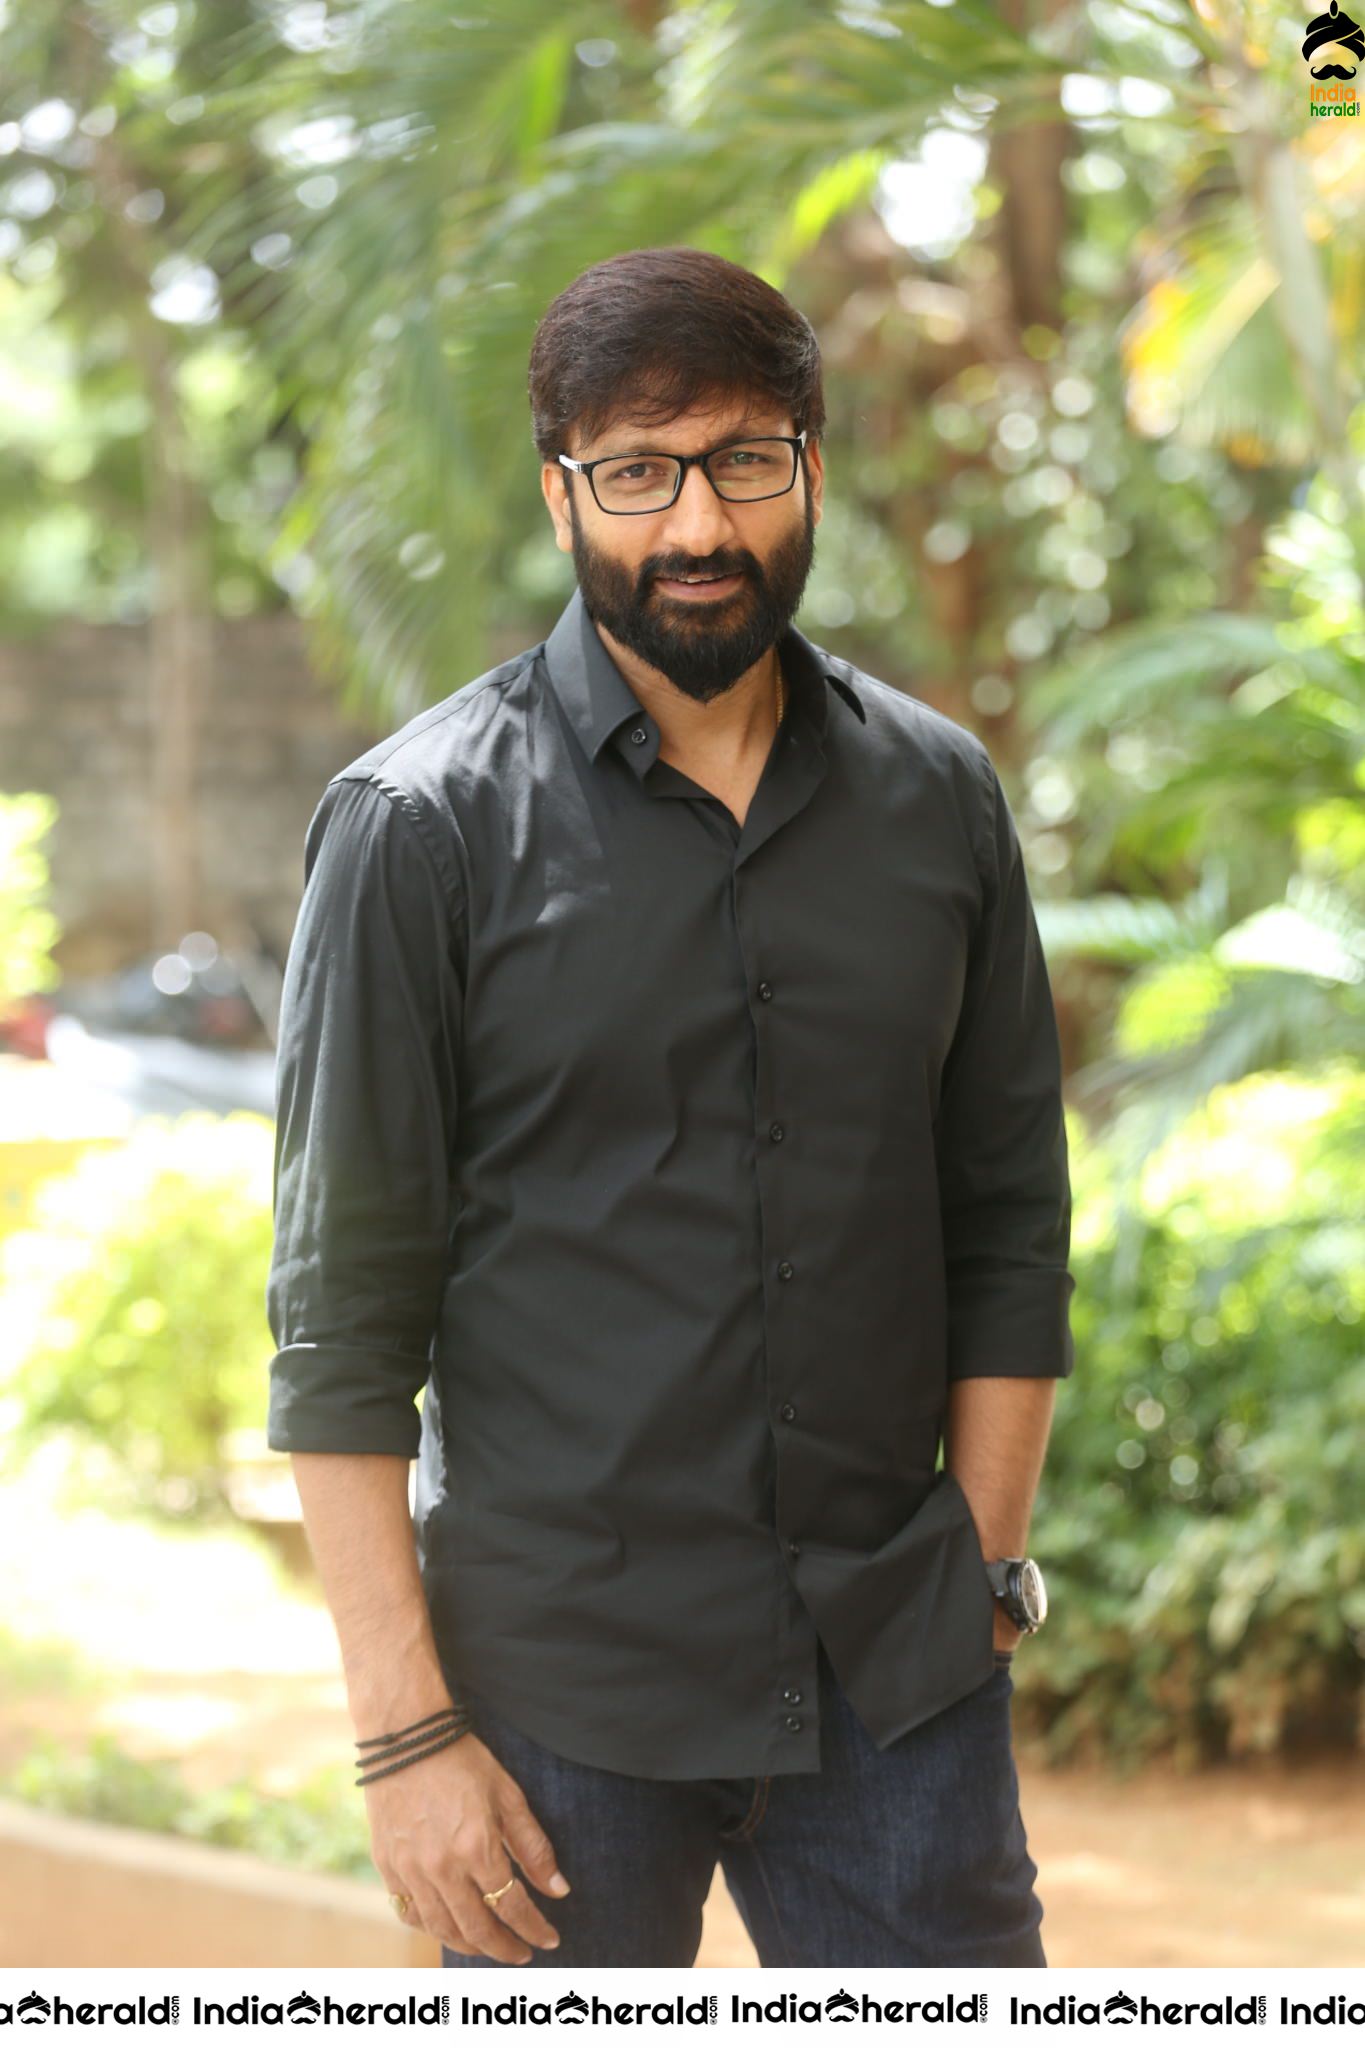 Actor Gopichand Latest Clicks with Nerd Glasses and Thick Beard Set 1